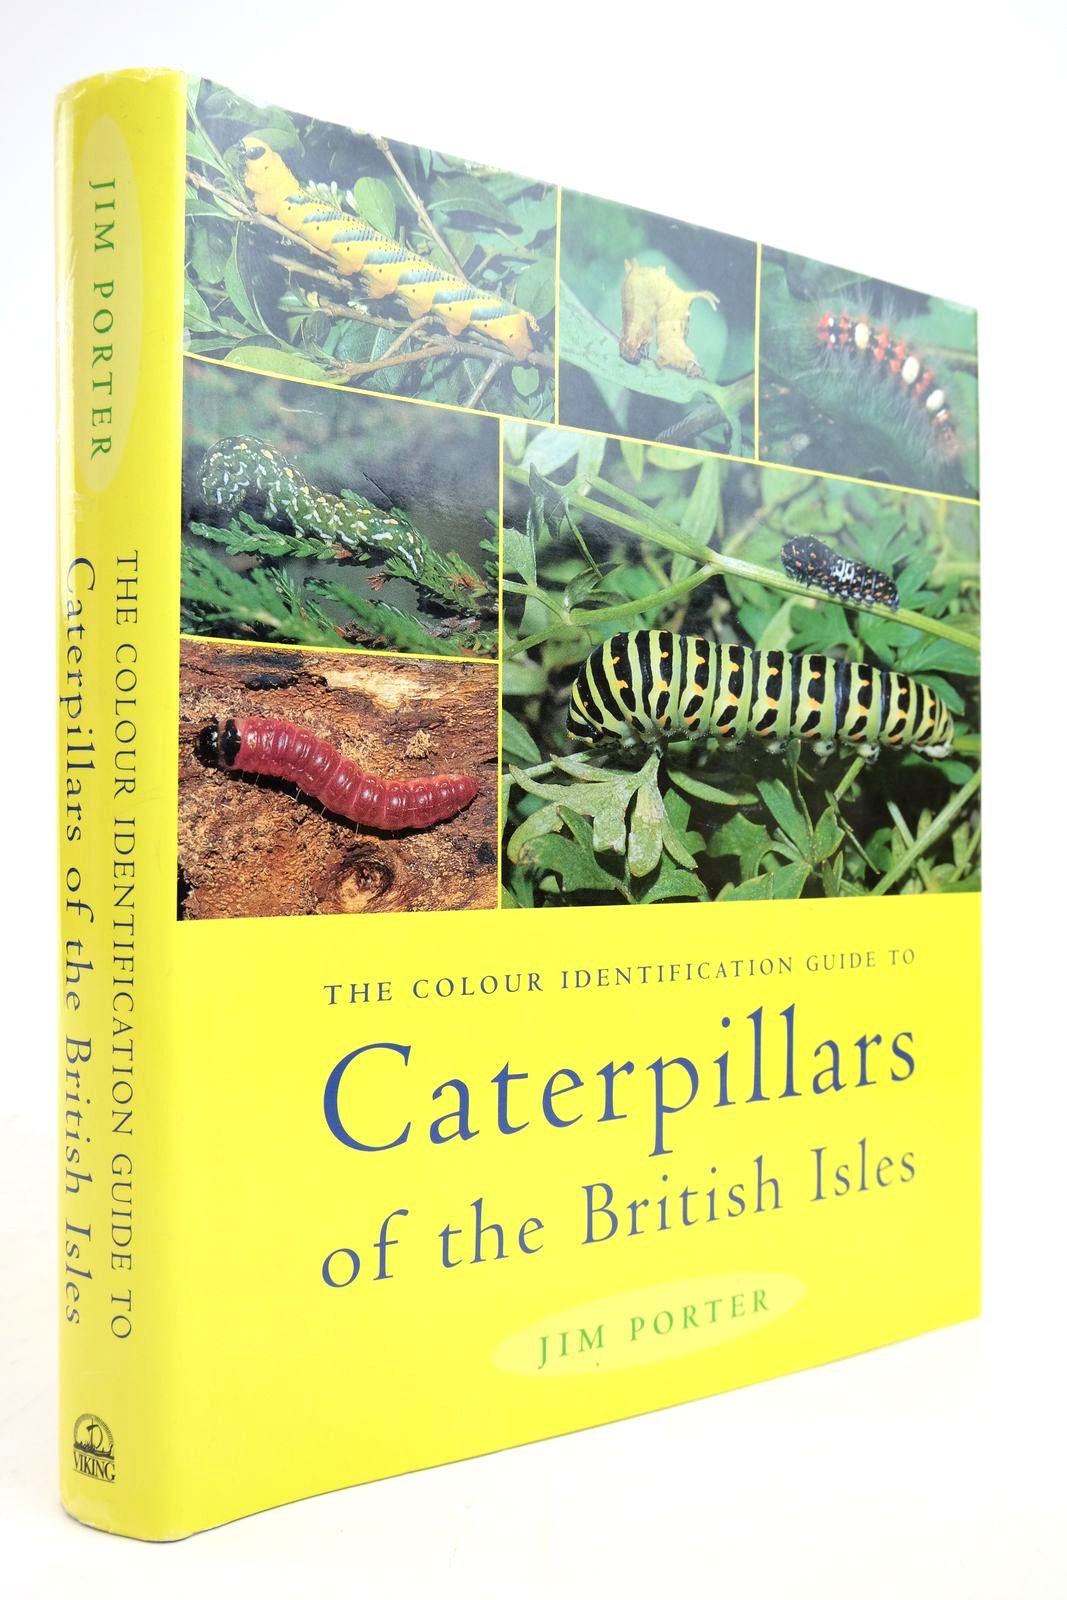 Photo of THE COLOUR IDENTIFICATION GUIDE TO CATERPILLARS OF THE BRITISH ISLES (MACROLEPIDOPTERA) written by Porter, Jim published by Viking (STOCK CODE: 2135356)  for sale by Stella & Rose's Books